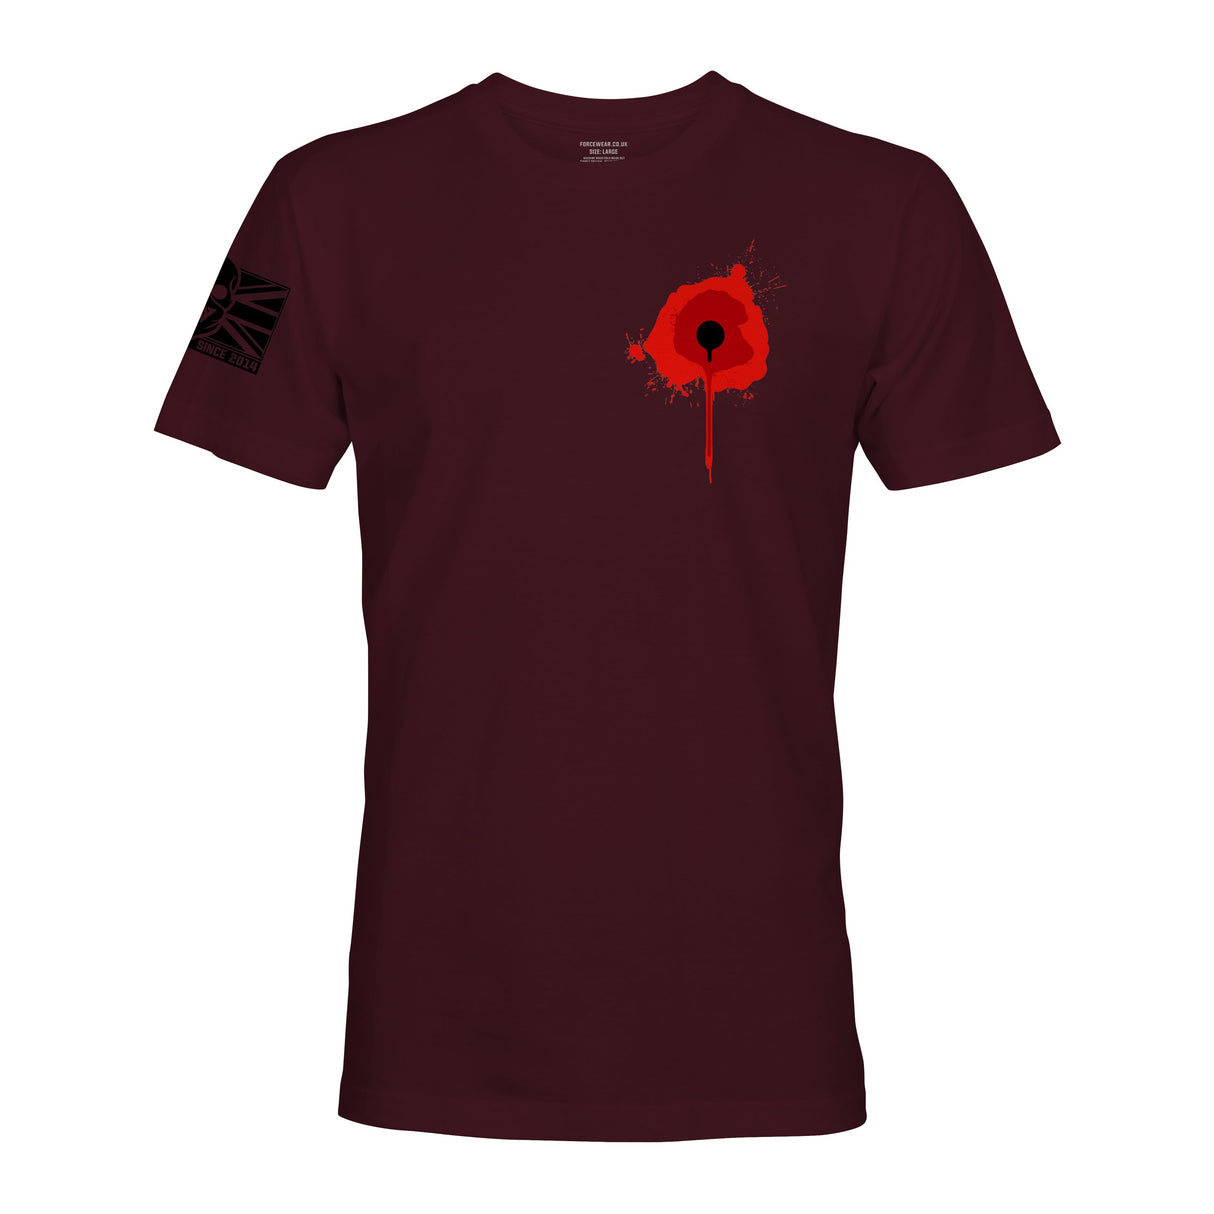 CHEST WOUND T-SHIRT - Force Wear HQ - T-SHIRTS